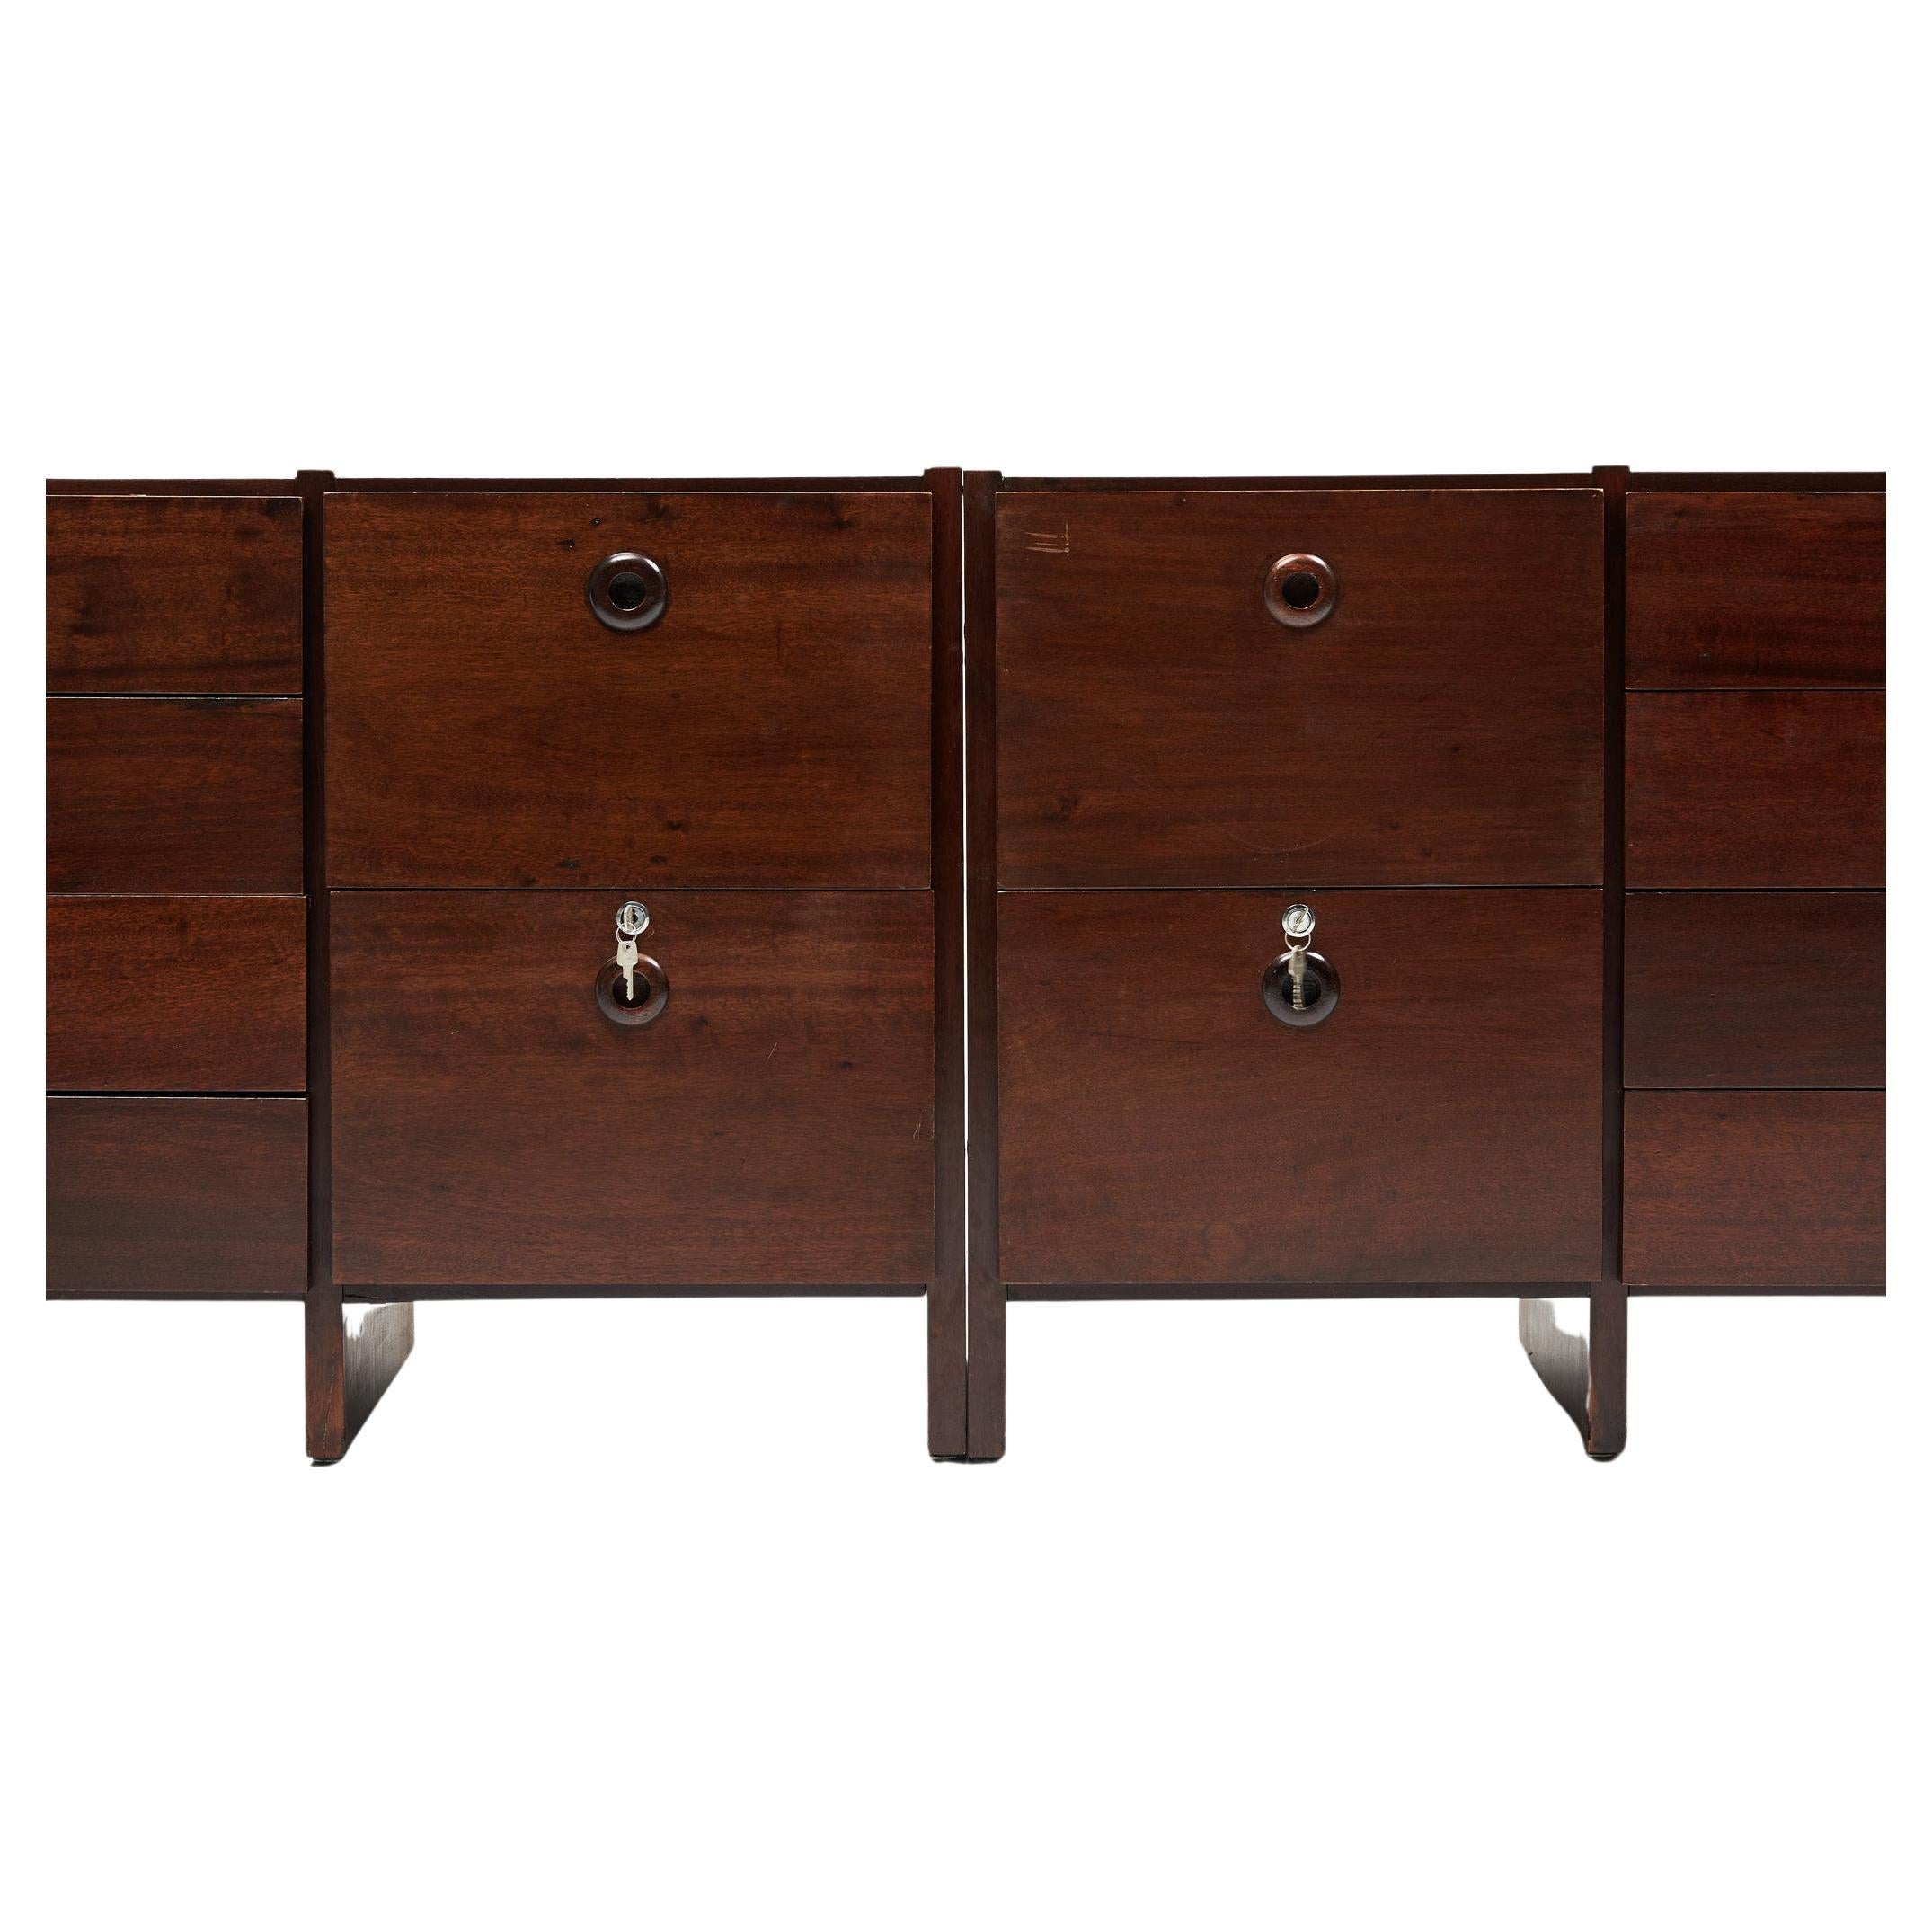 Available immediately, these Brazilian Modern file cabinet pair in wood by Geraldo de Barros for Hobjeto made in 1971 is awesome.

These handsome Mid-Century Modern pair is not only rare but convenient. Each one is made of Jacaranda leaf and